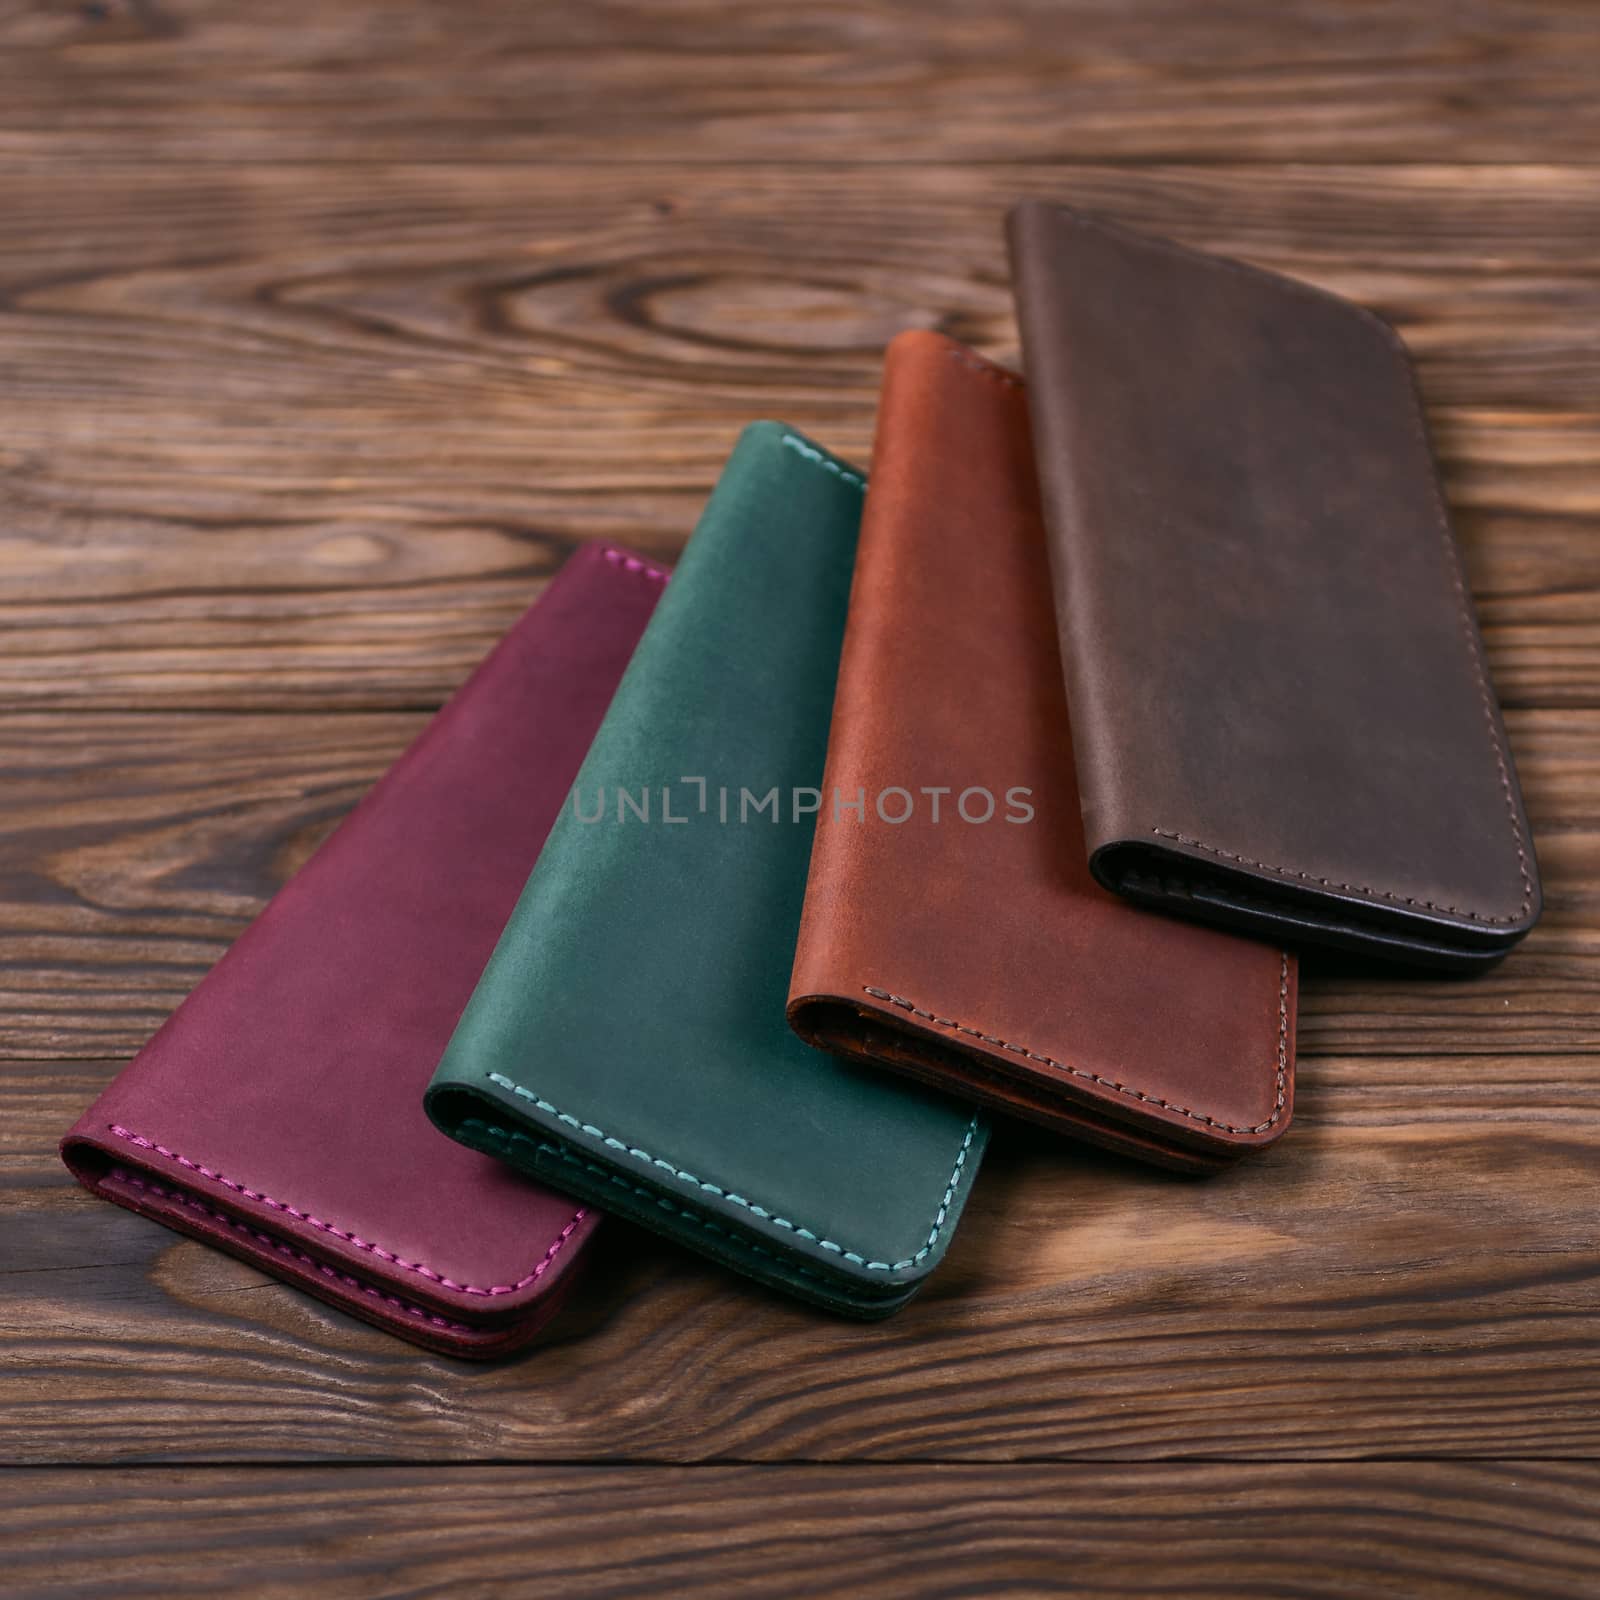 Four handmade leather porte-monnaie on wooden textured background. Side view. Stock photo of luxury accessories. by alexsdriver